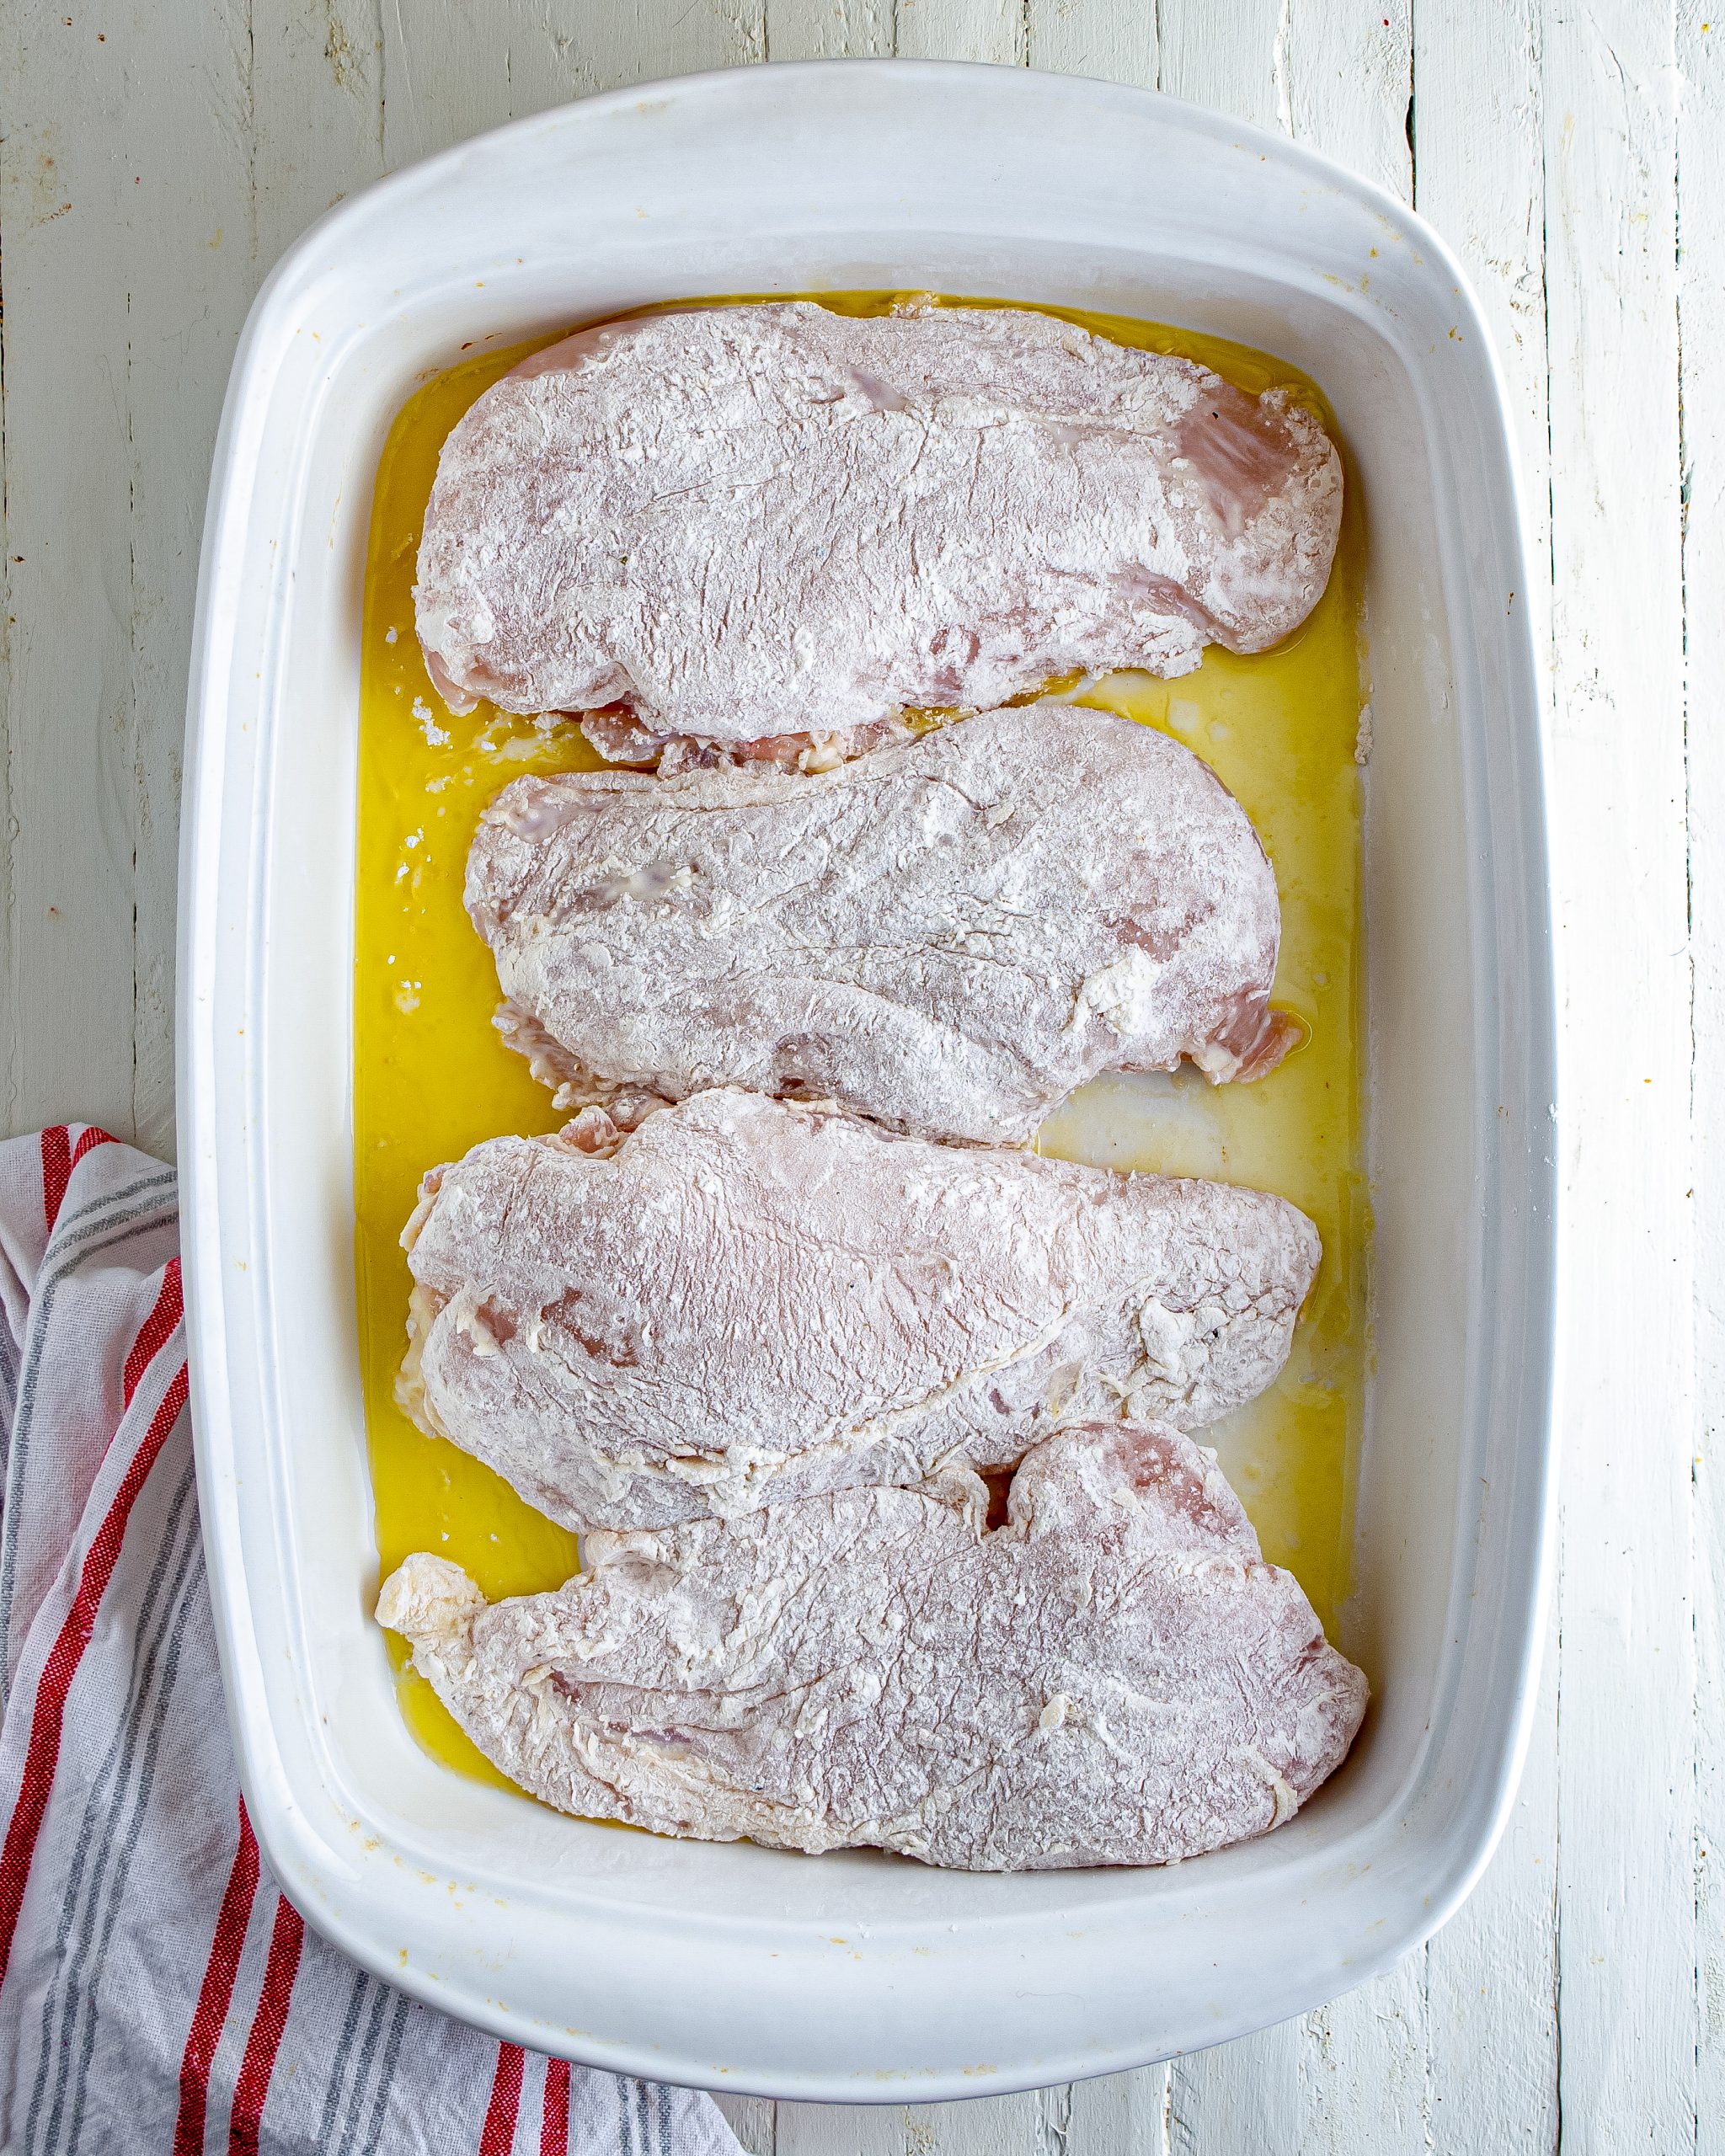 Layer the chicken in the baking dish.